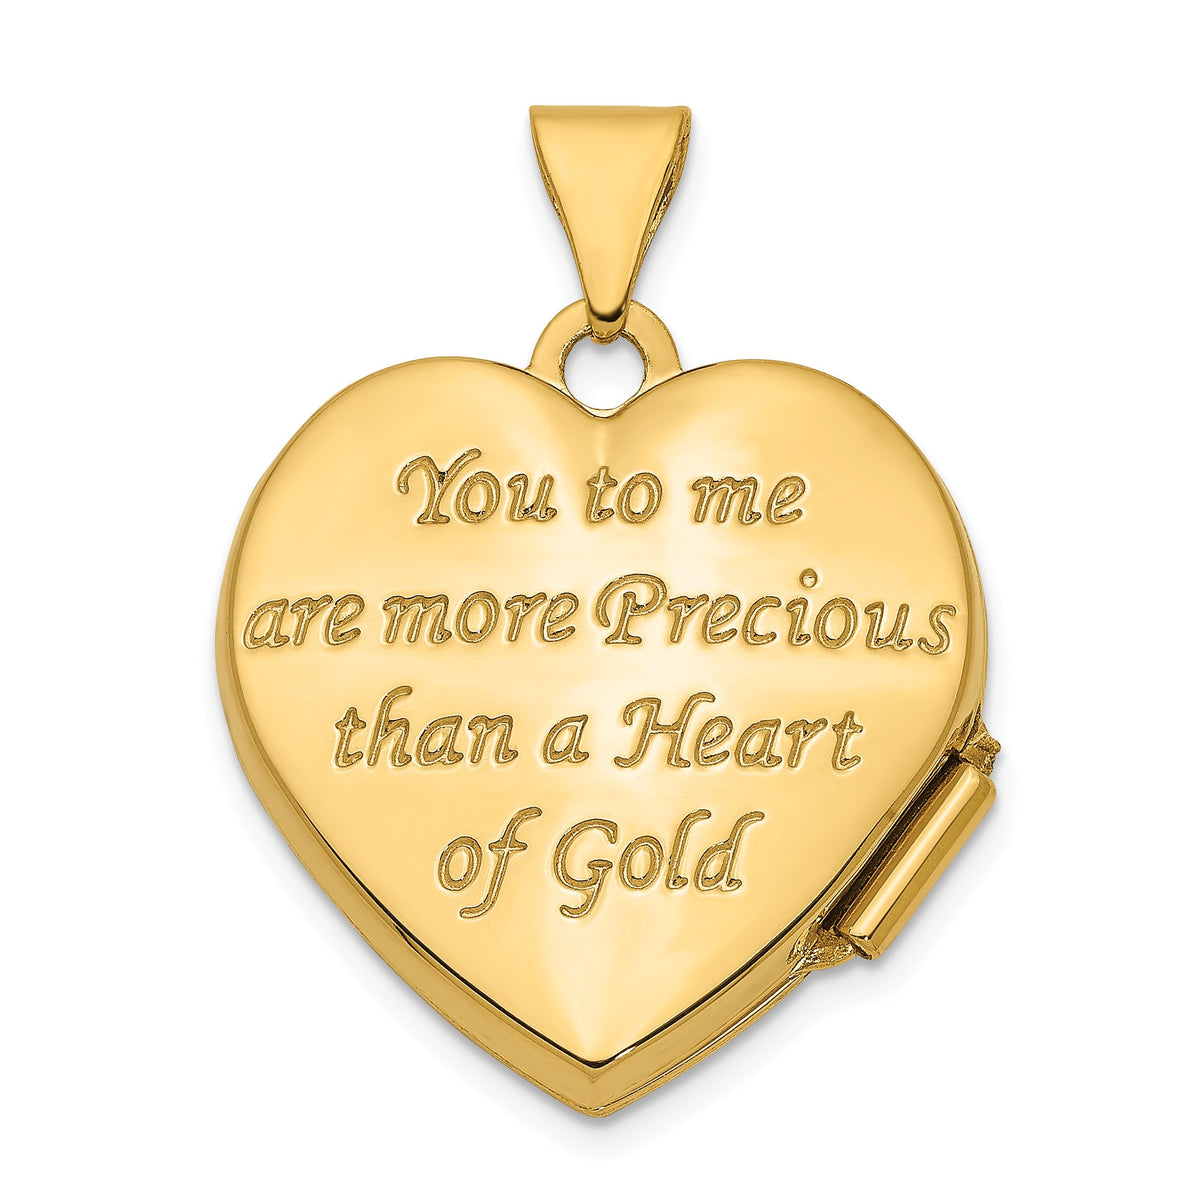 Alternate view of the 14k Yellow Gold &amp; White Rhodium 18mm Heart of Gold Sentiment Locket by The Black Bow Jewelry Co.